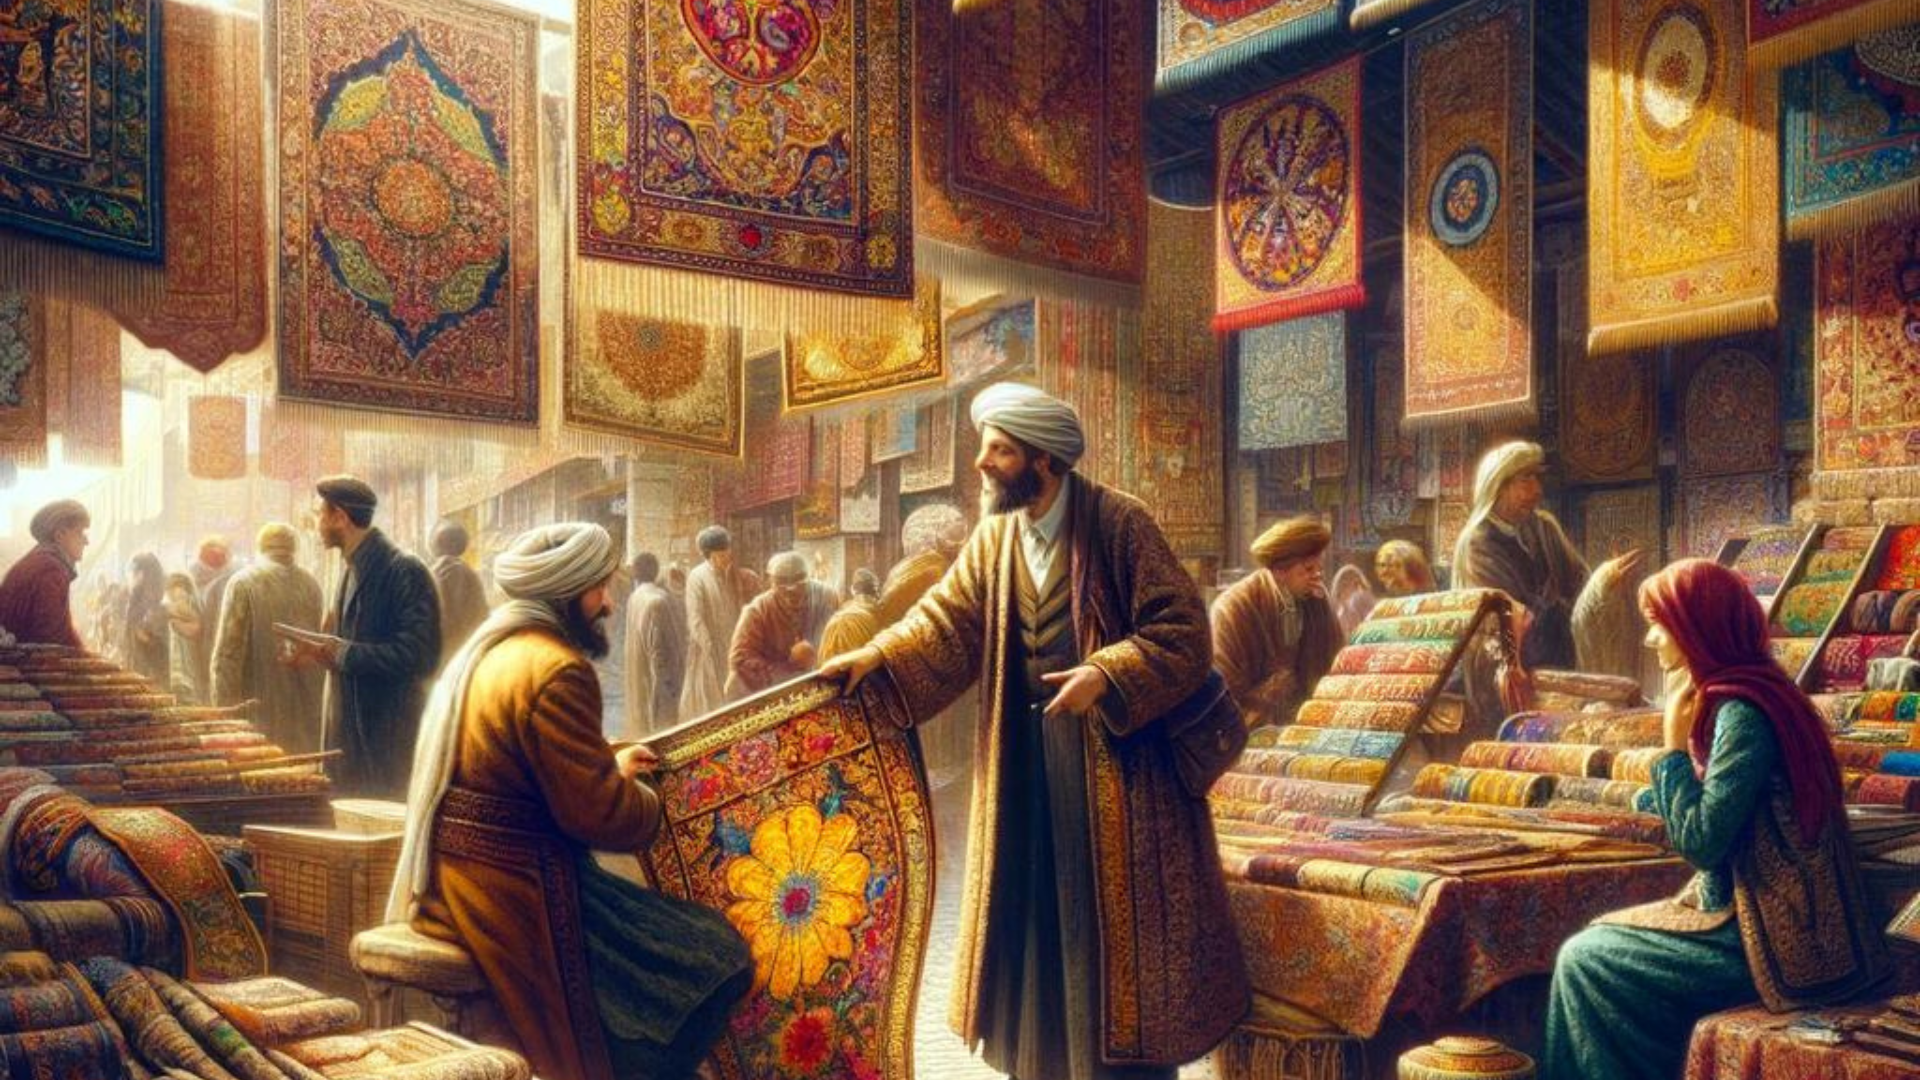 A vibrant marketplace scene with a merchant showcasing colorful tapestries to a potential buyer, surrounded by other stalls and customers.